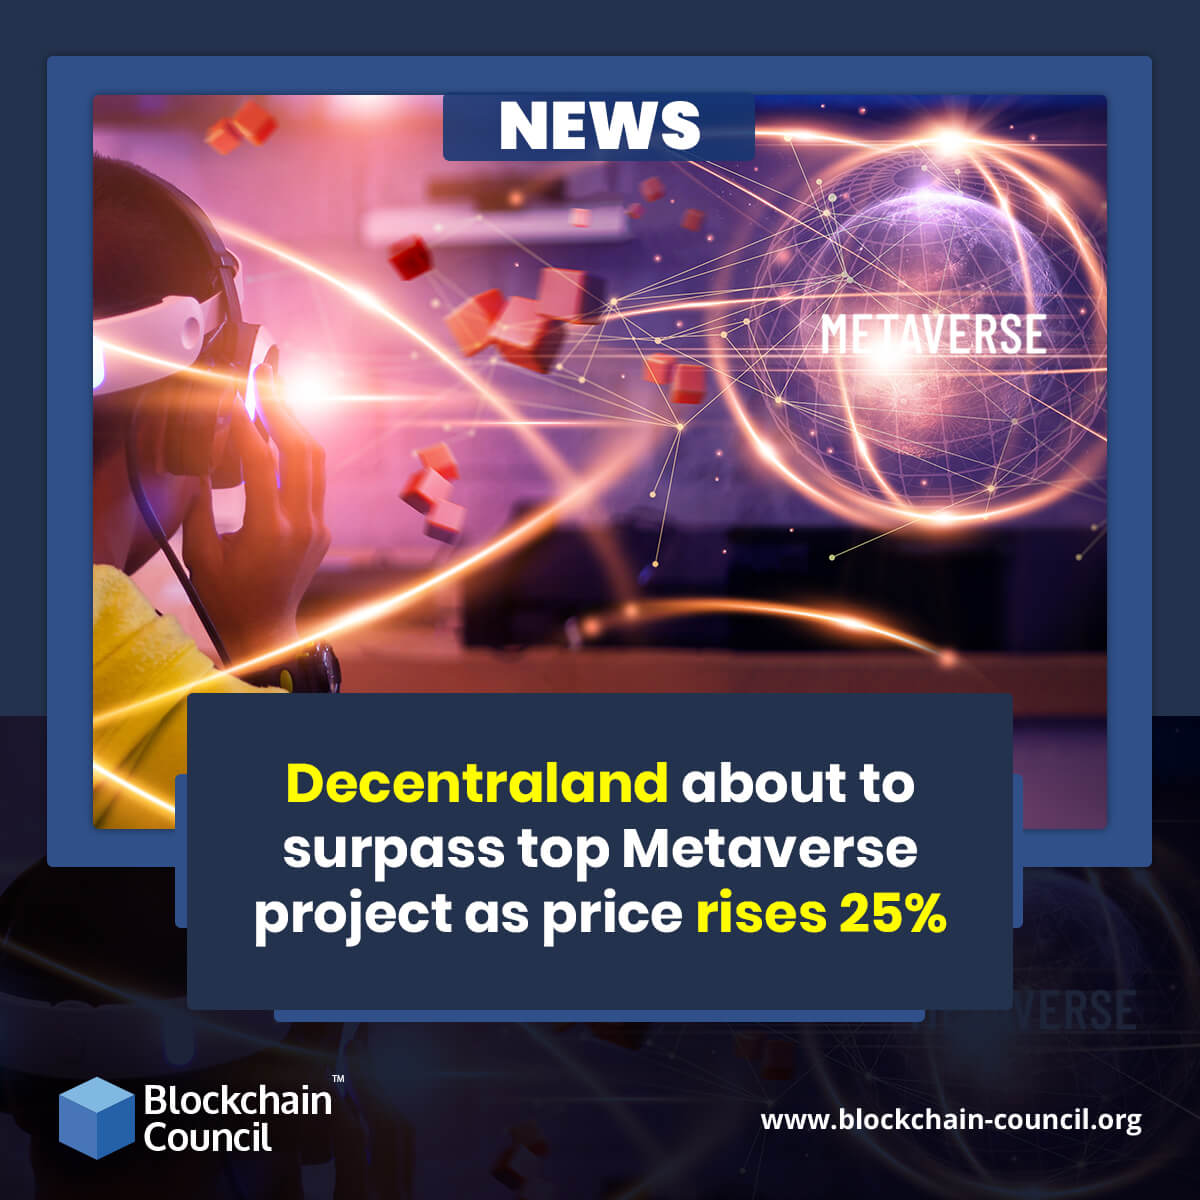 Decentraland about to surpass top Metaverse project as price rises 25%